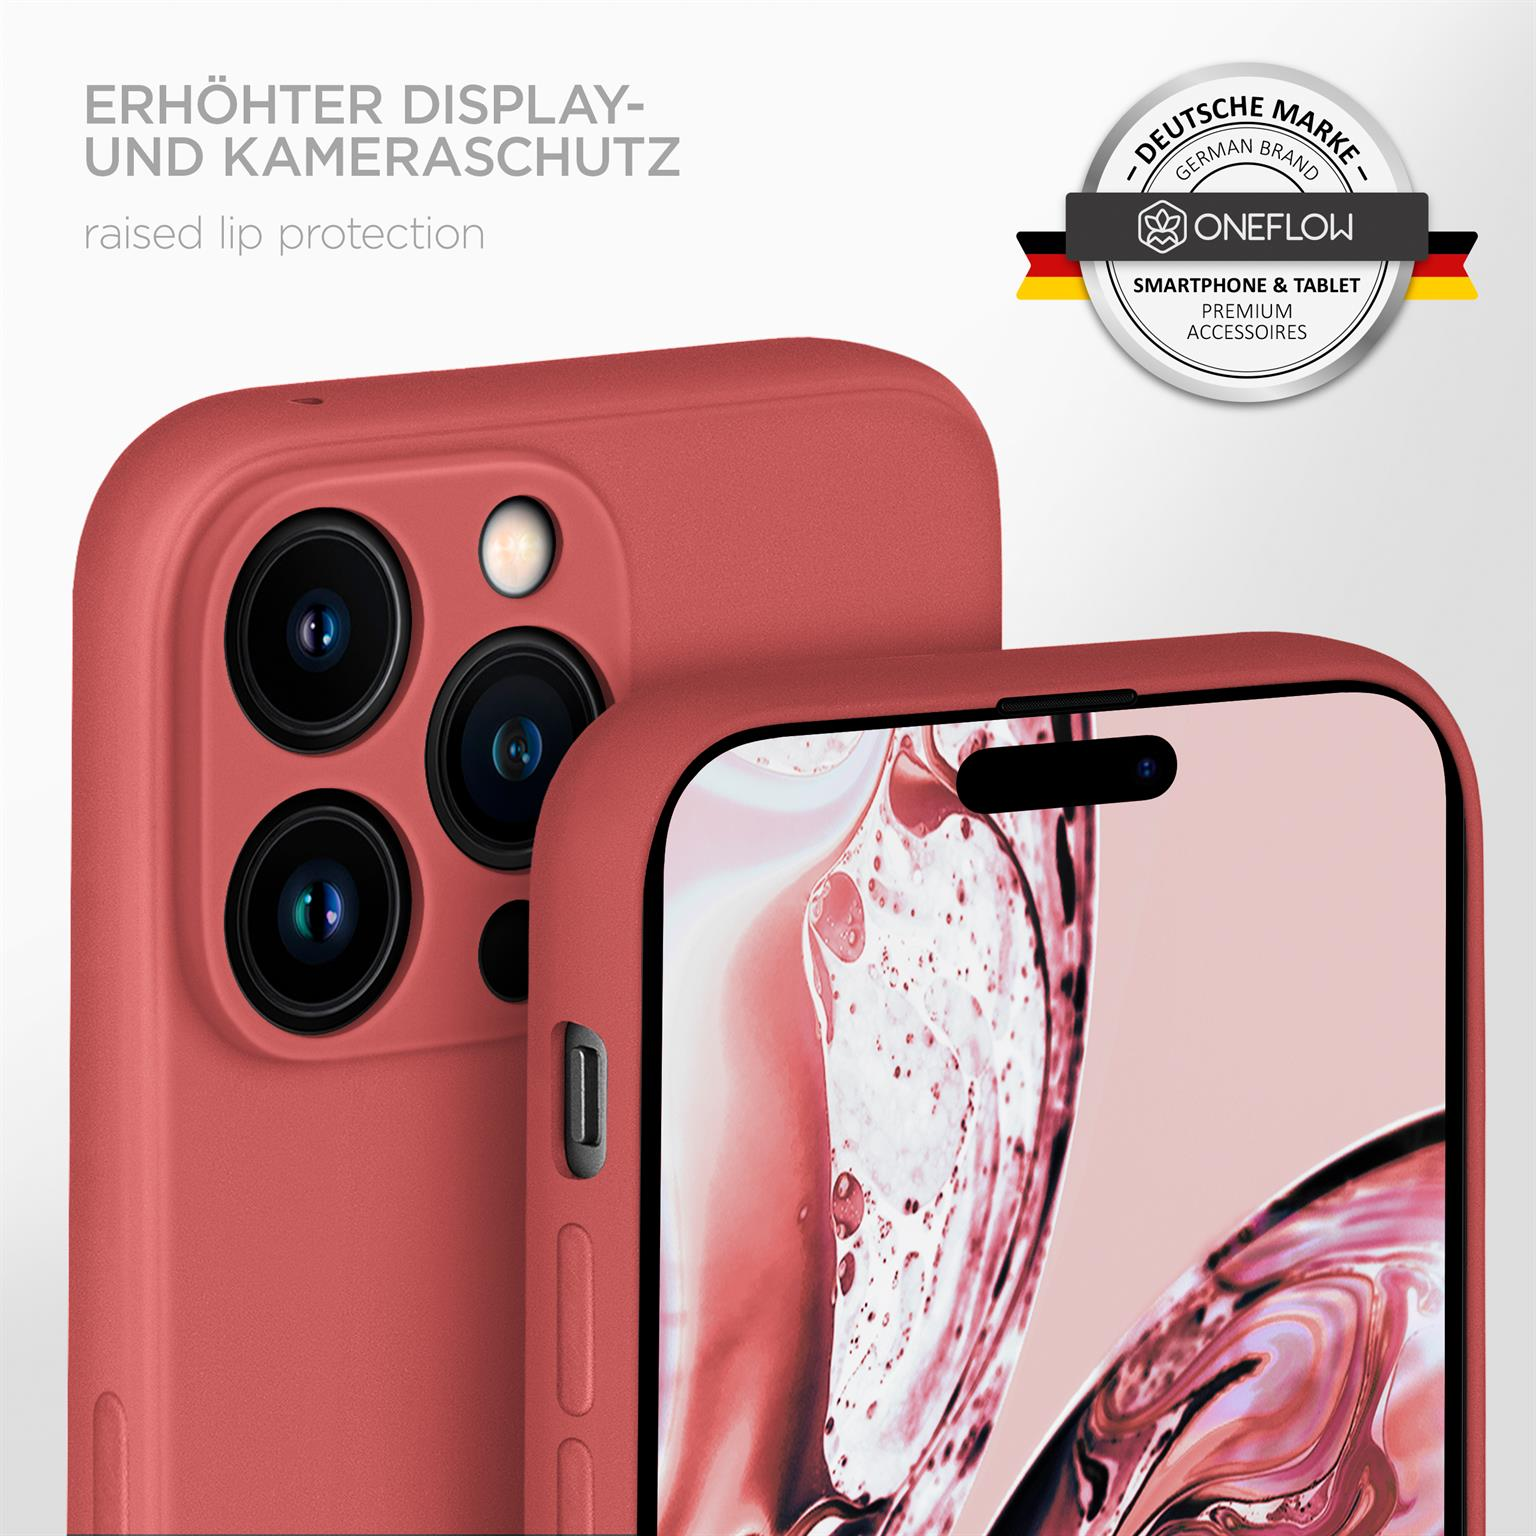 ONEFLOW Soft 14 iPhone Pro Max, Sonnenuntergangsrot Backcover, Apple, Case